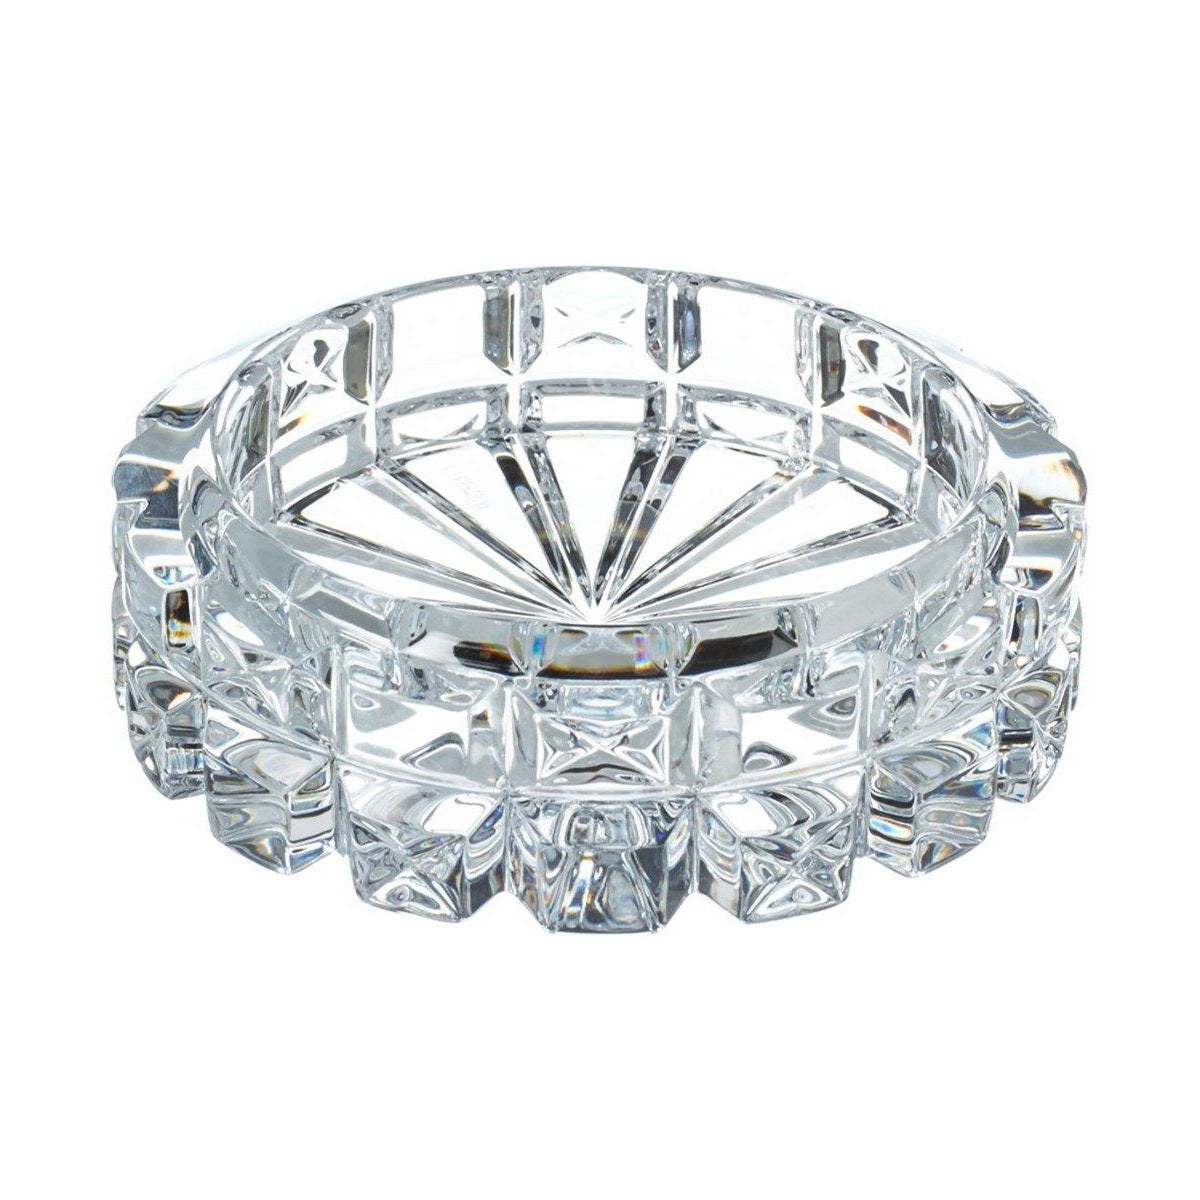 Morrow Ash Tray (Waterford Crystal) - Gallery Gifts Online 